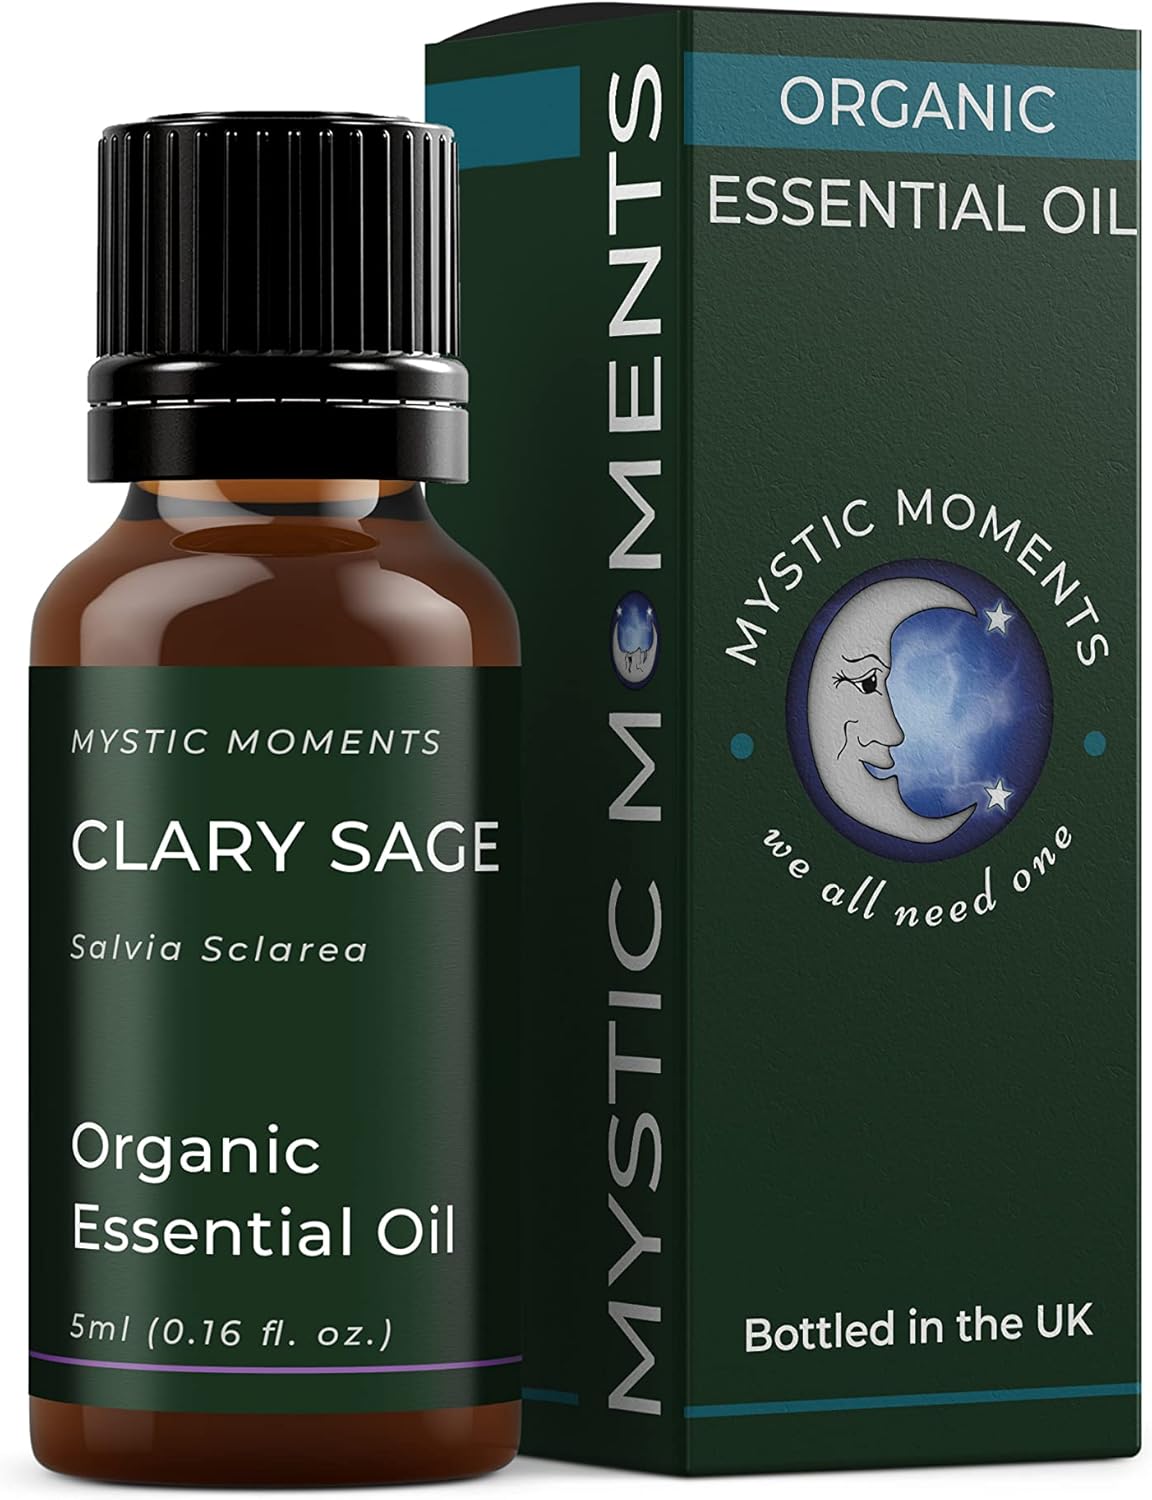 Mystic Moments | Organic Clary Sage Essential Oil 5ml - Pure & Natural oil for Diffusers, Aromatherapy & Massage Blends Vegan GMO Free